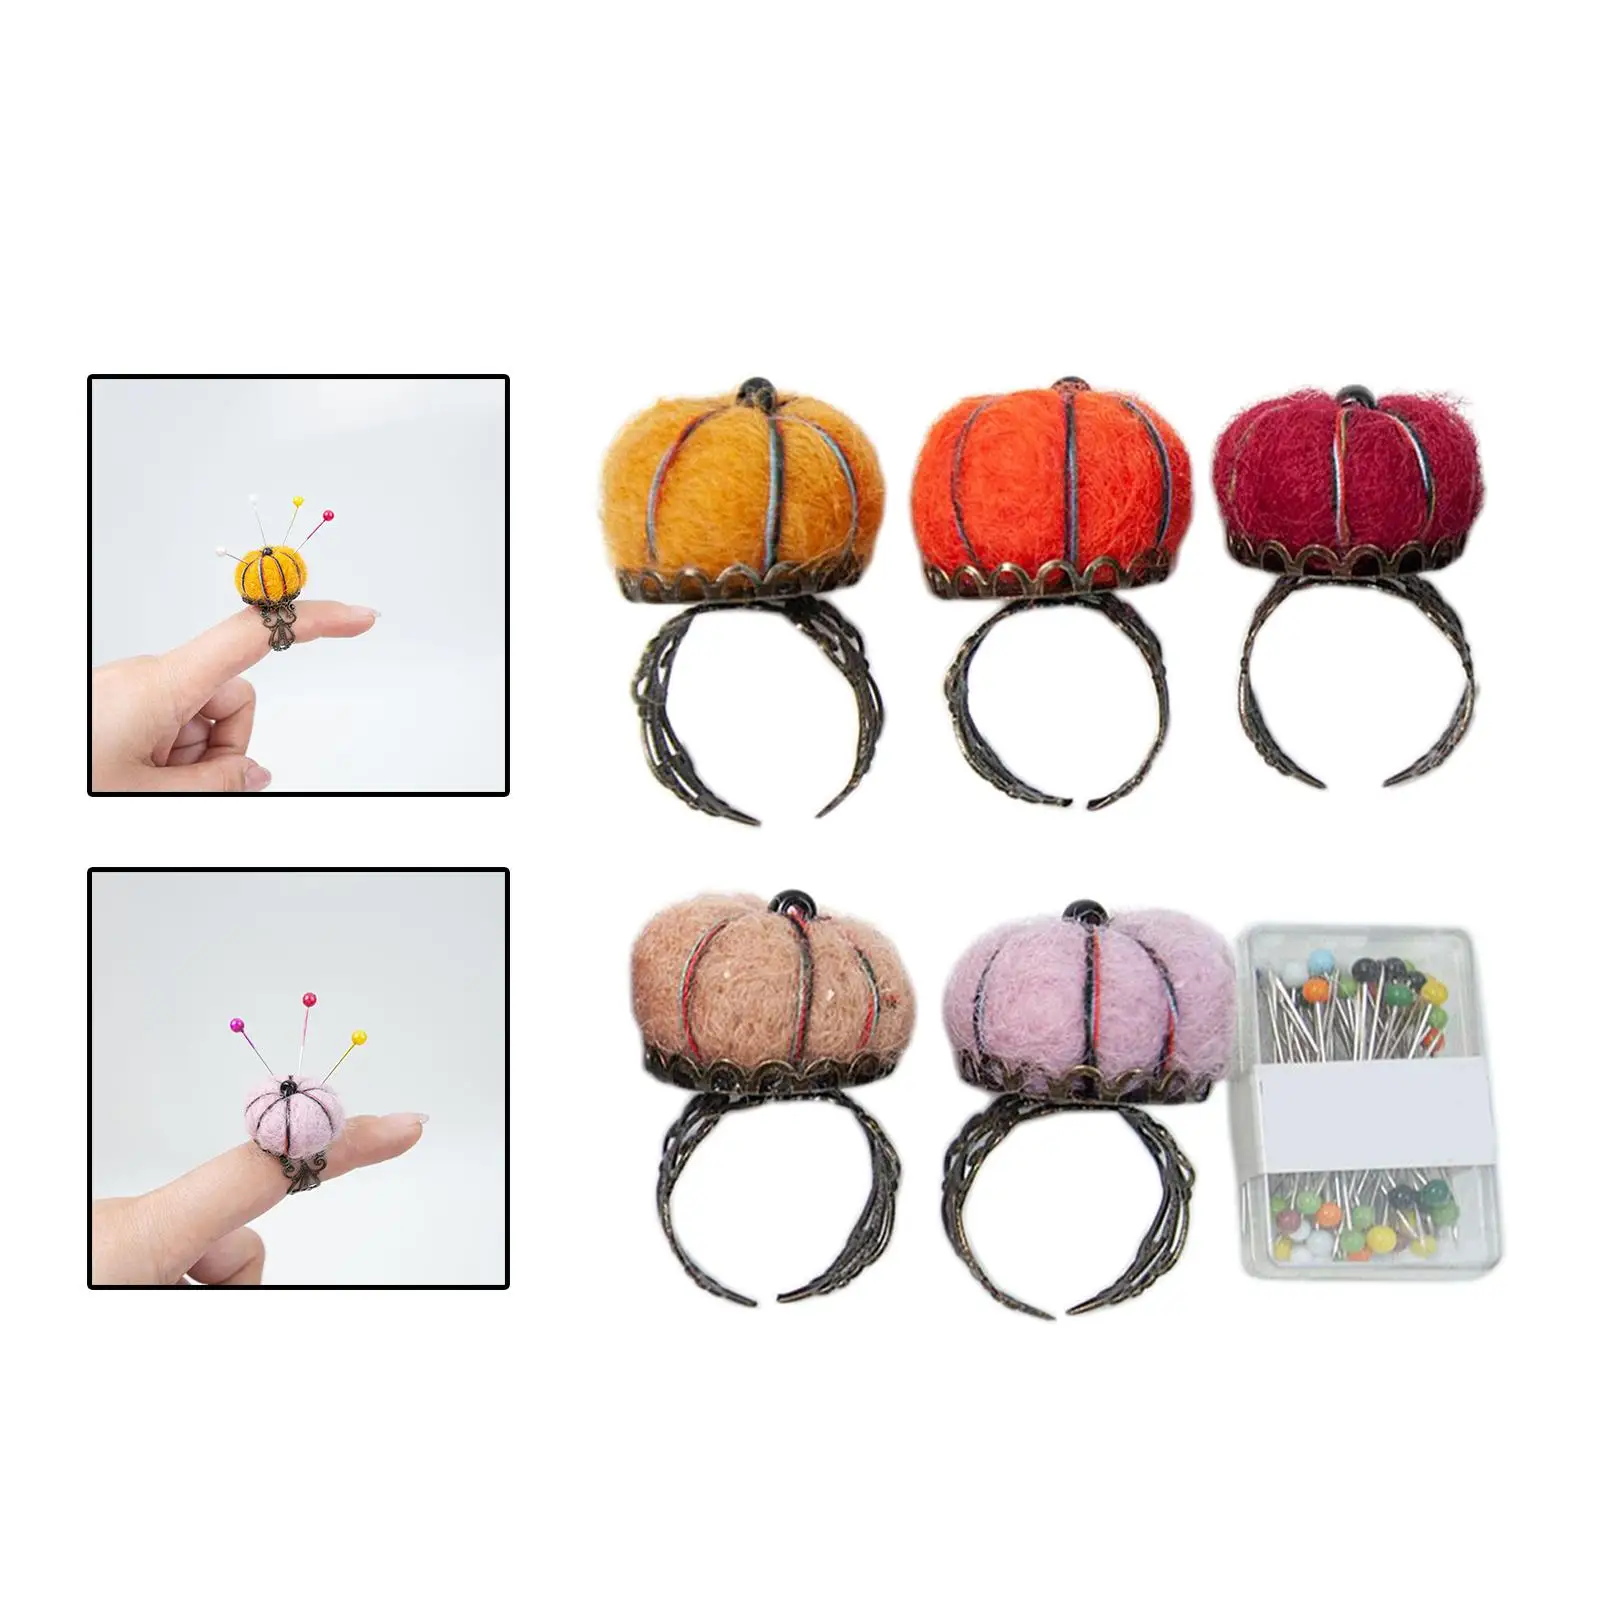 5x Felt Pin Cushion Kit Assorted Color Lightweight Sewing Supply DIY Projects Finger Ring Pincushions for Sewing Accessory Tools